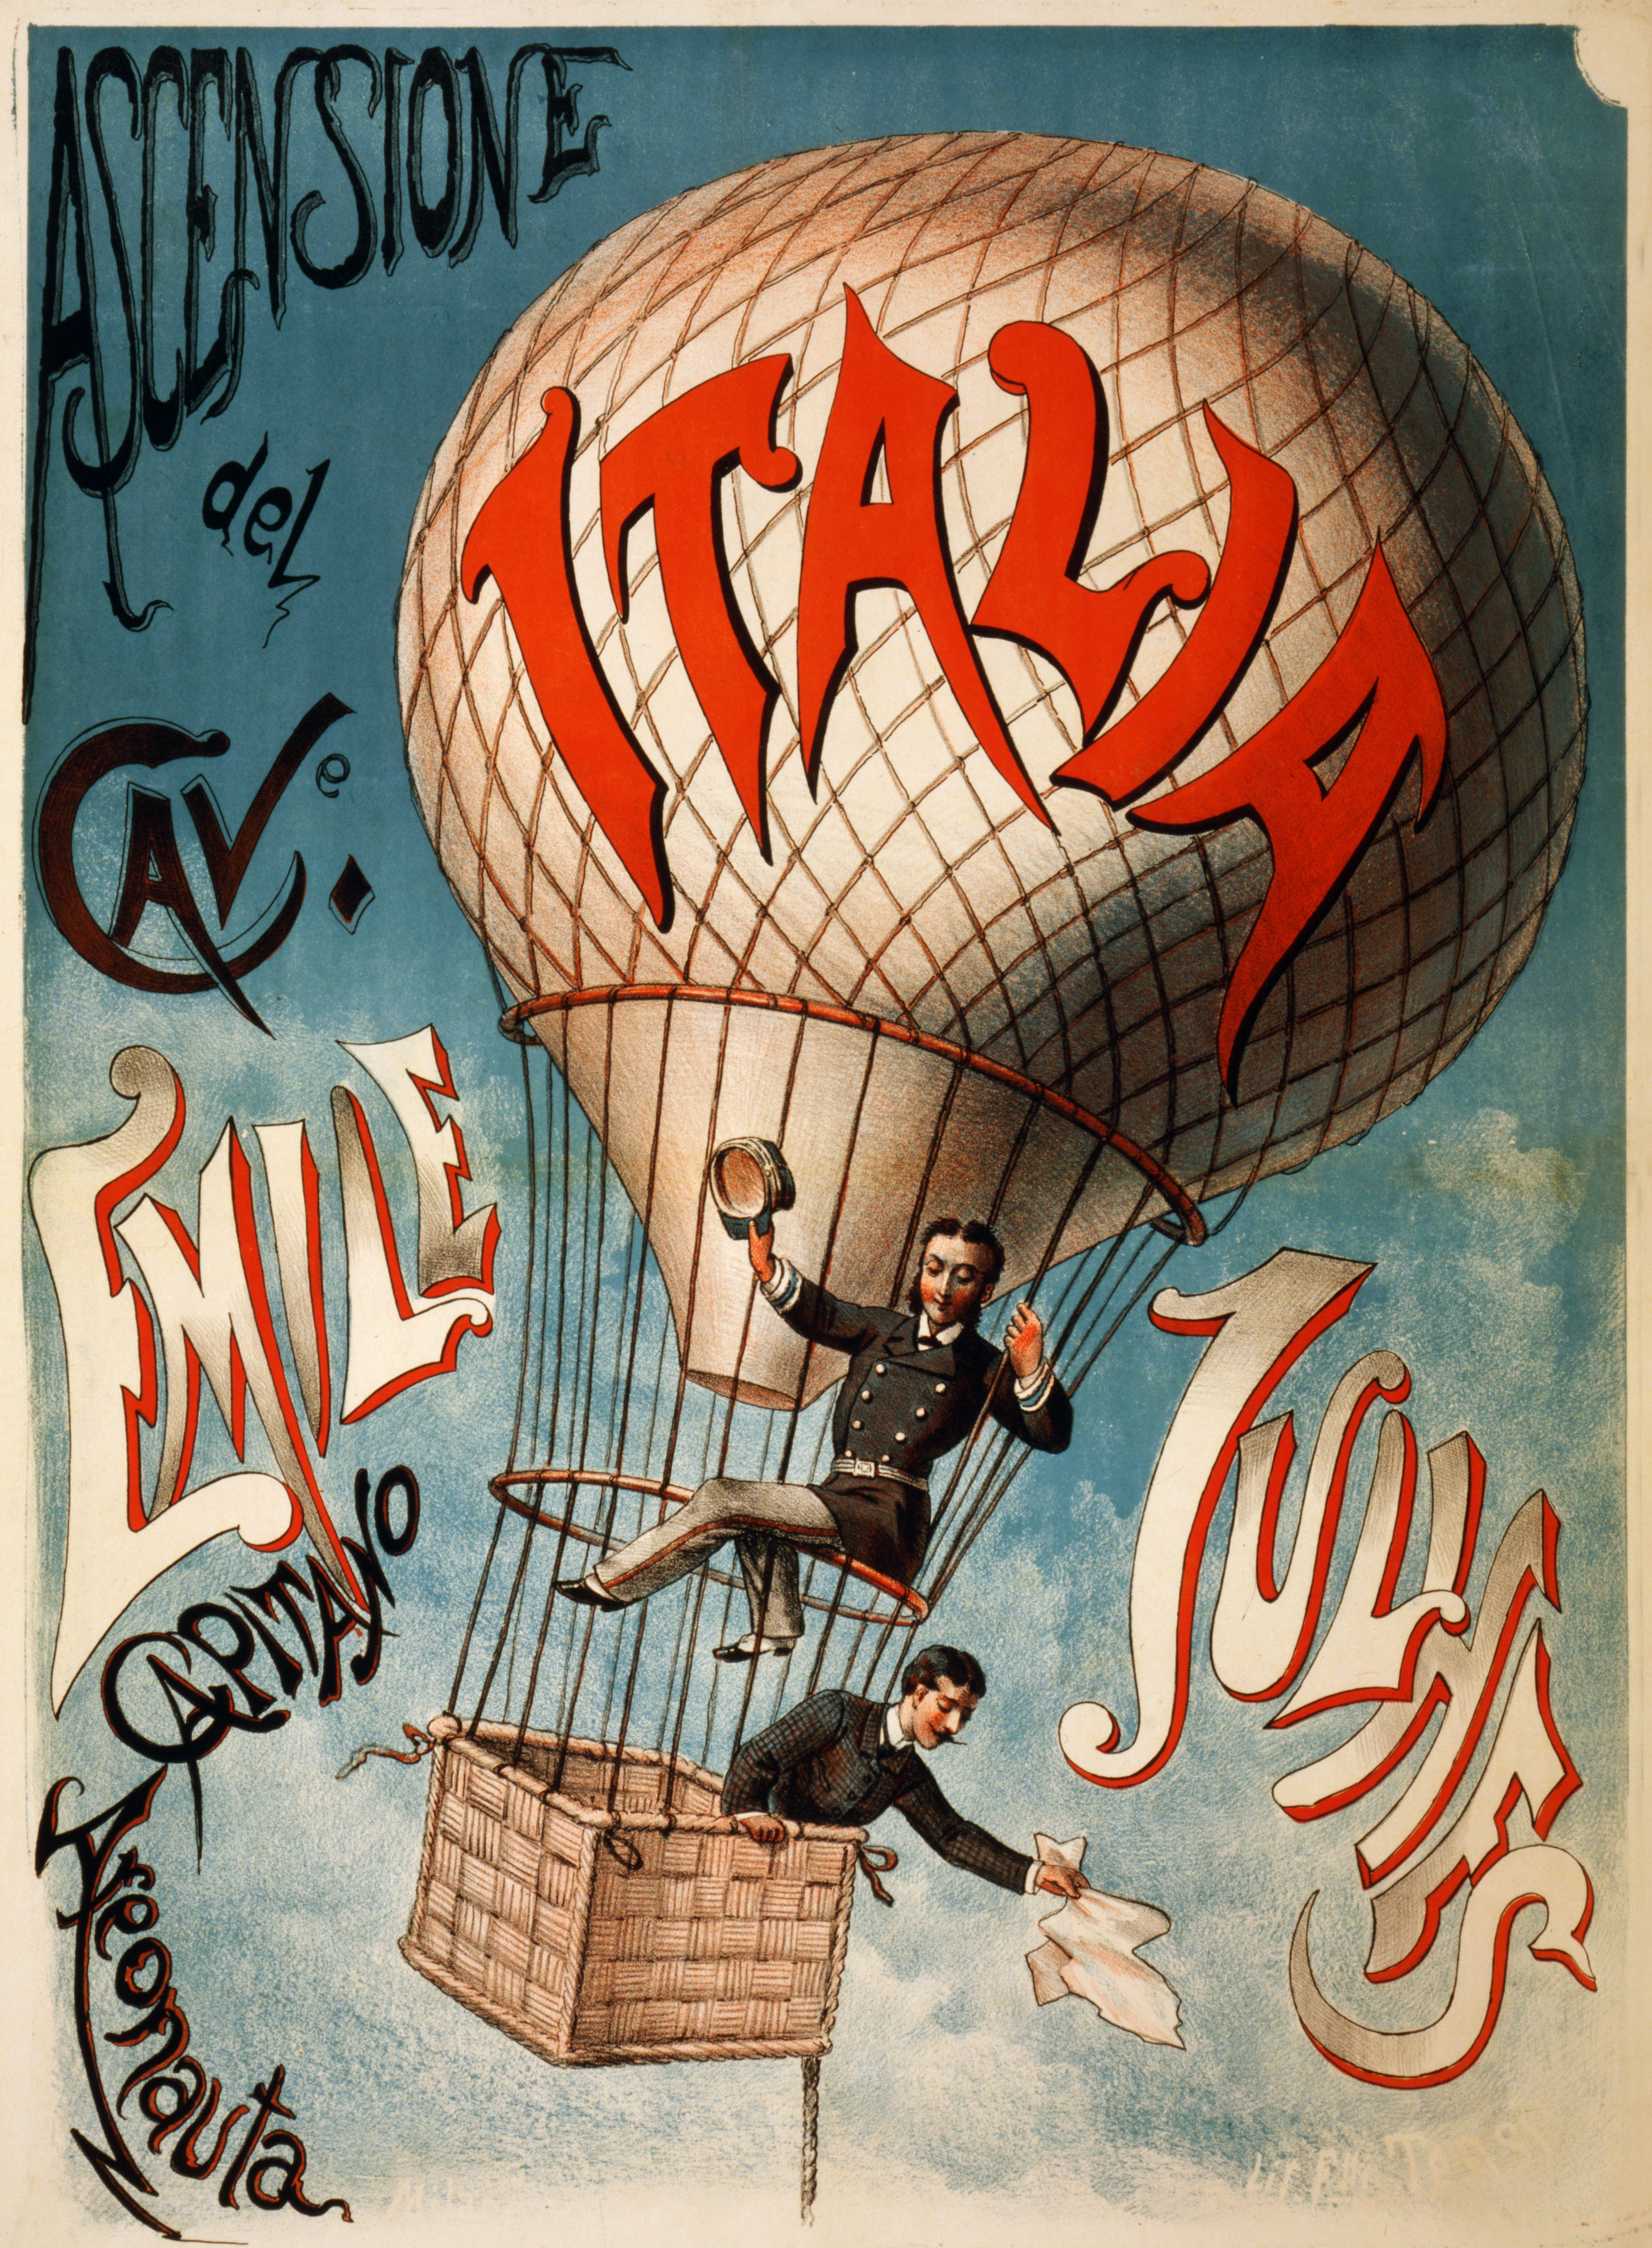 Ascensione del cavaliere Emile Julhes, early flight poster, ca. 1890